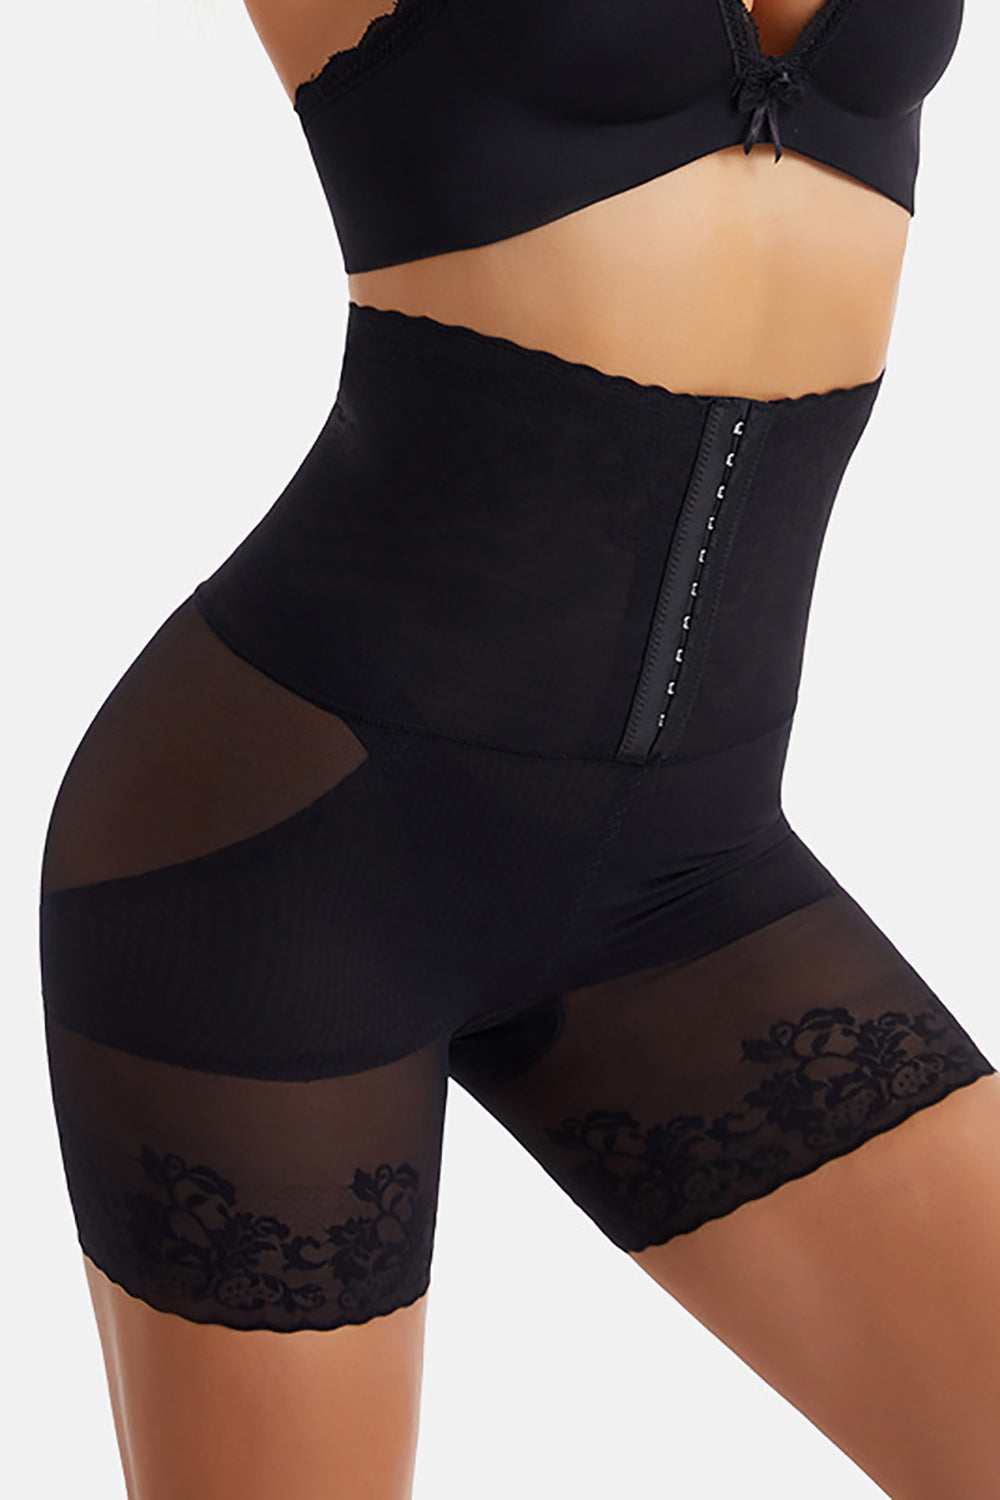 Fashion Solid Waist Trainer Fashion Breathable Conjoined Corset Shapewear  Underwear Tight Fitting Sleepwear Women Shapers Body Pants(#Apricot)